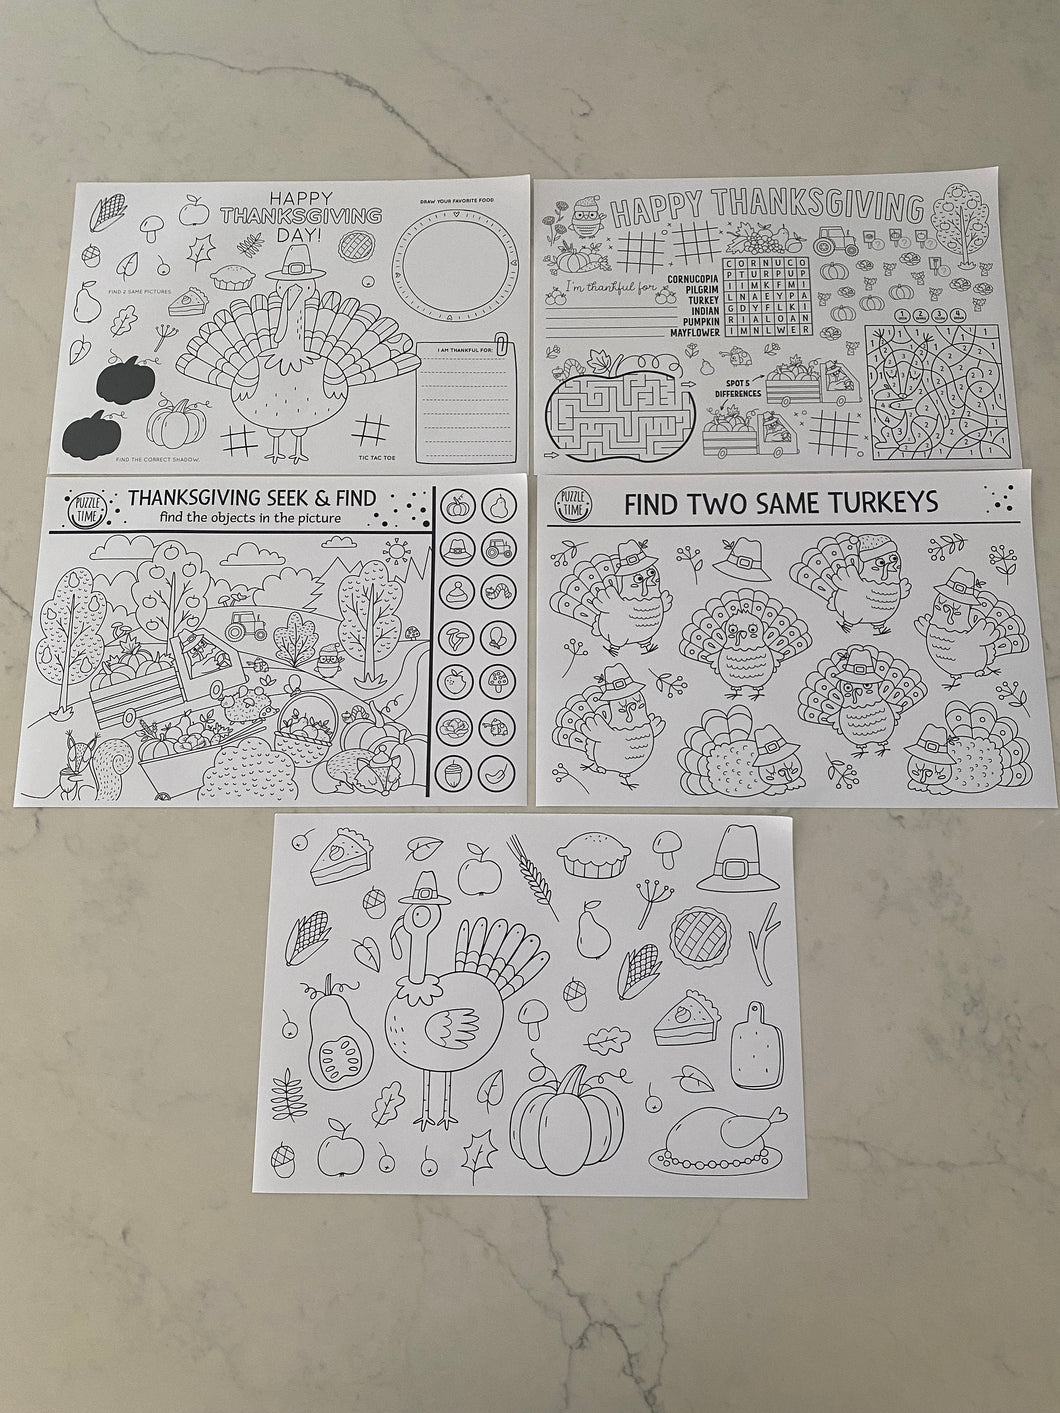 Thanksgiving Coloring Placemat, Coloring Pad, Child Placemat, Fall Coloring Pad, Fall Placemat, Child Coloring Pad, Child Learning, Gift